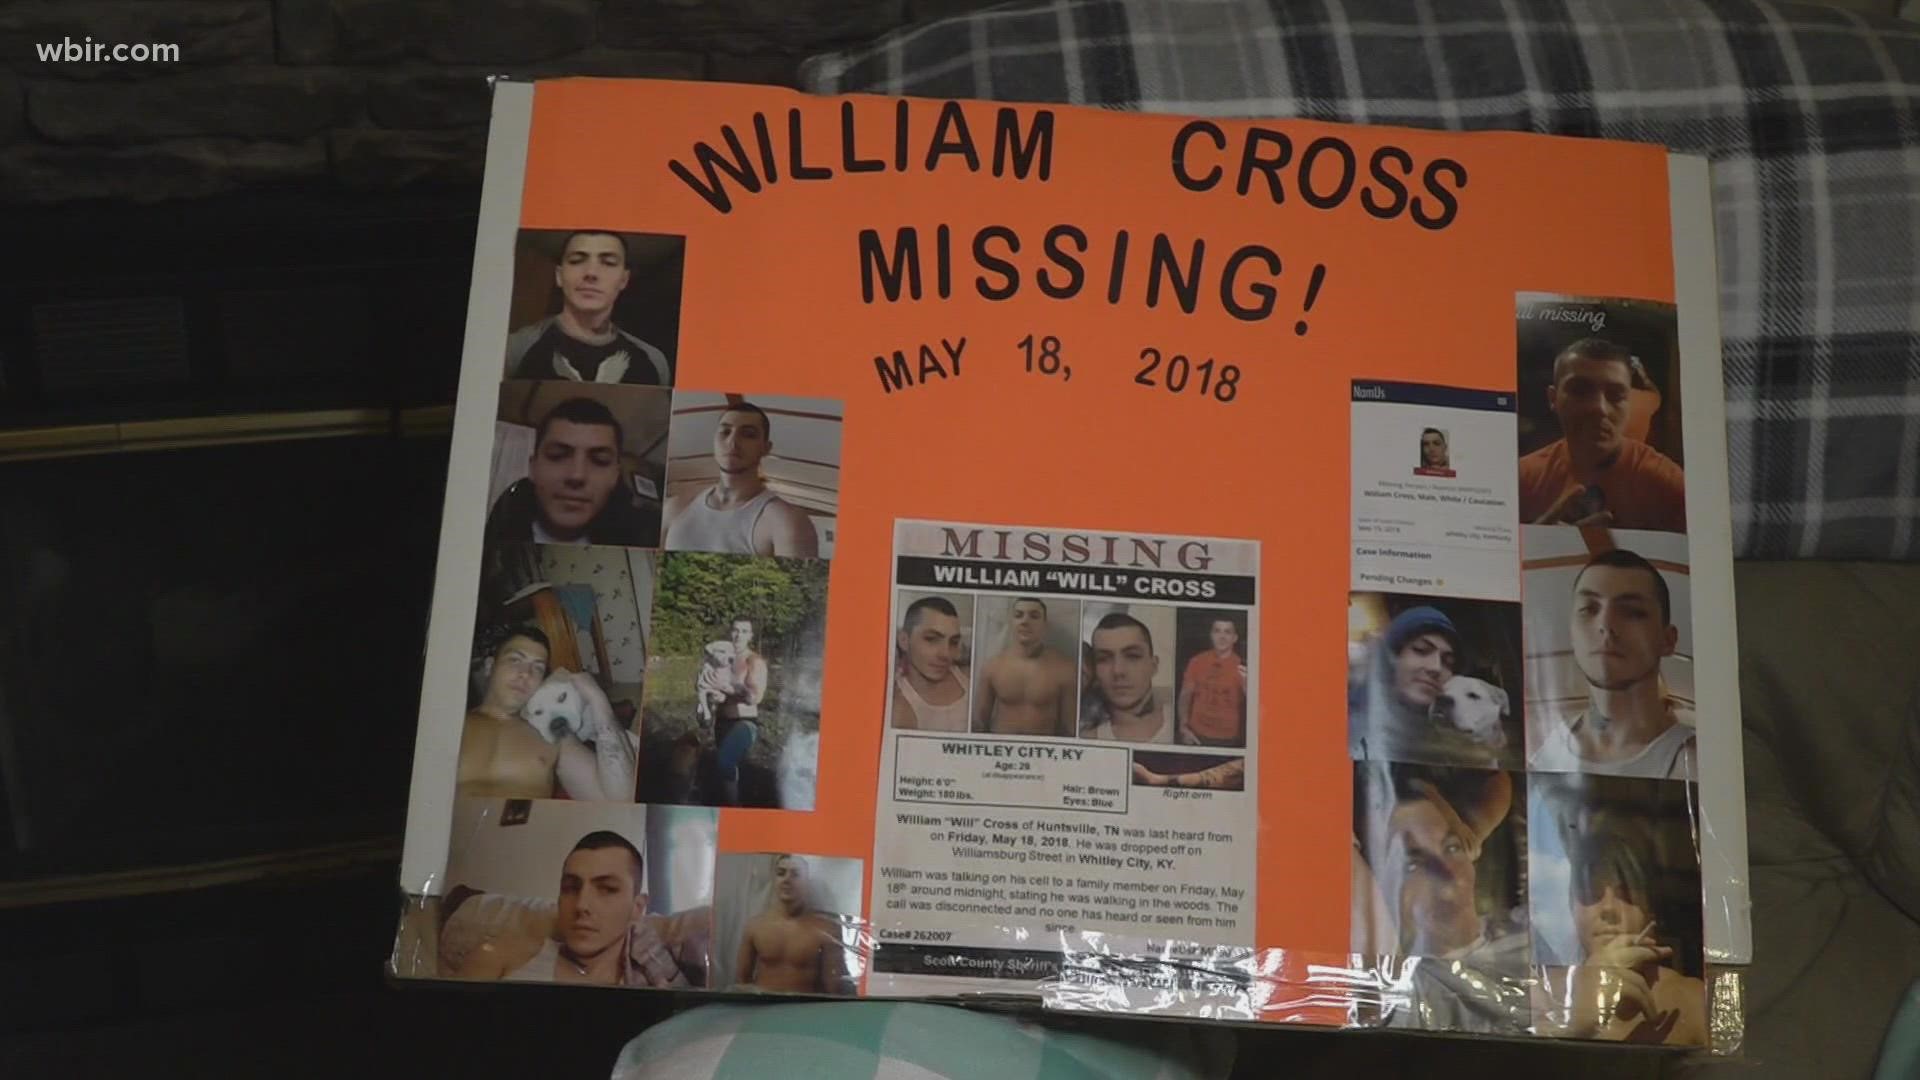 William Cross of Scott County went missing four years ago on May 18, 2018. His family is still searching for him.